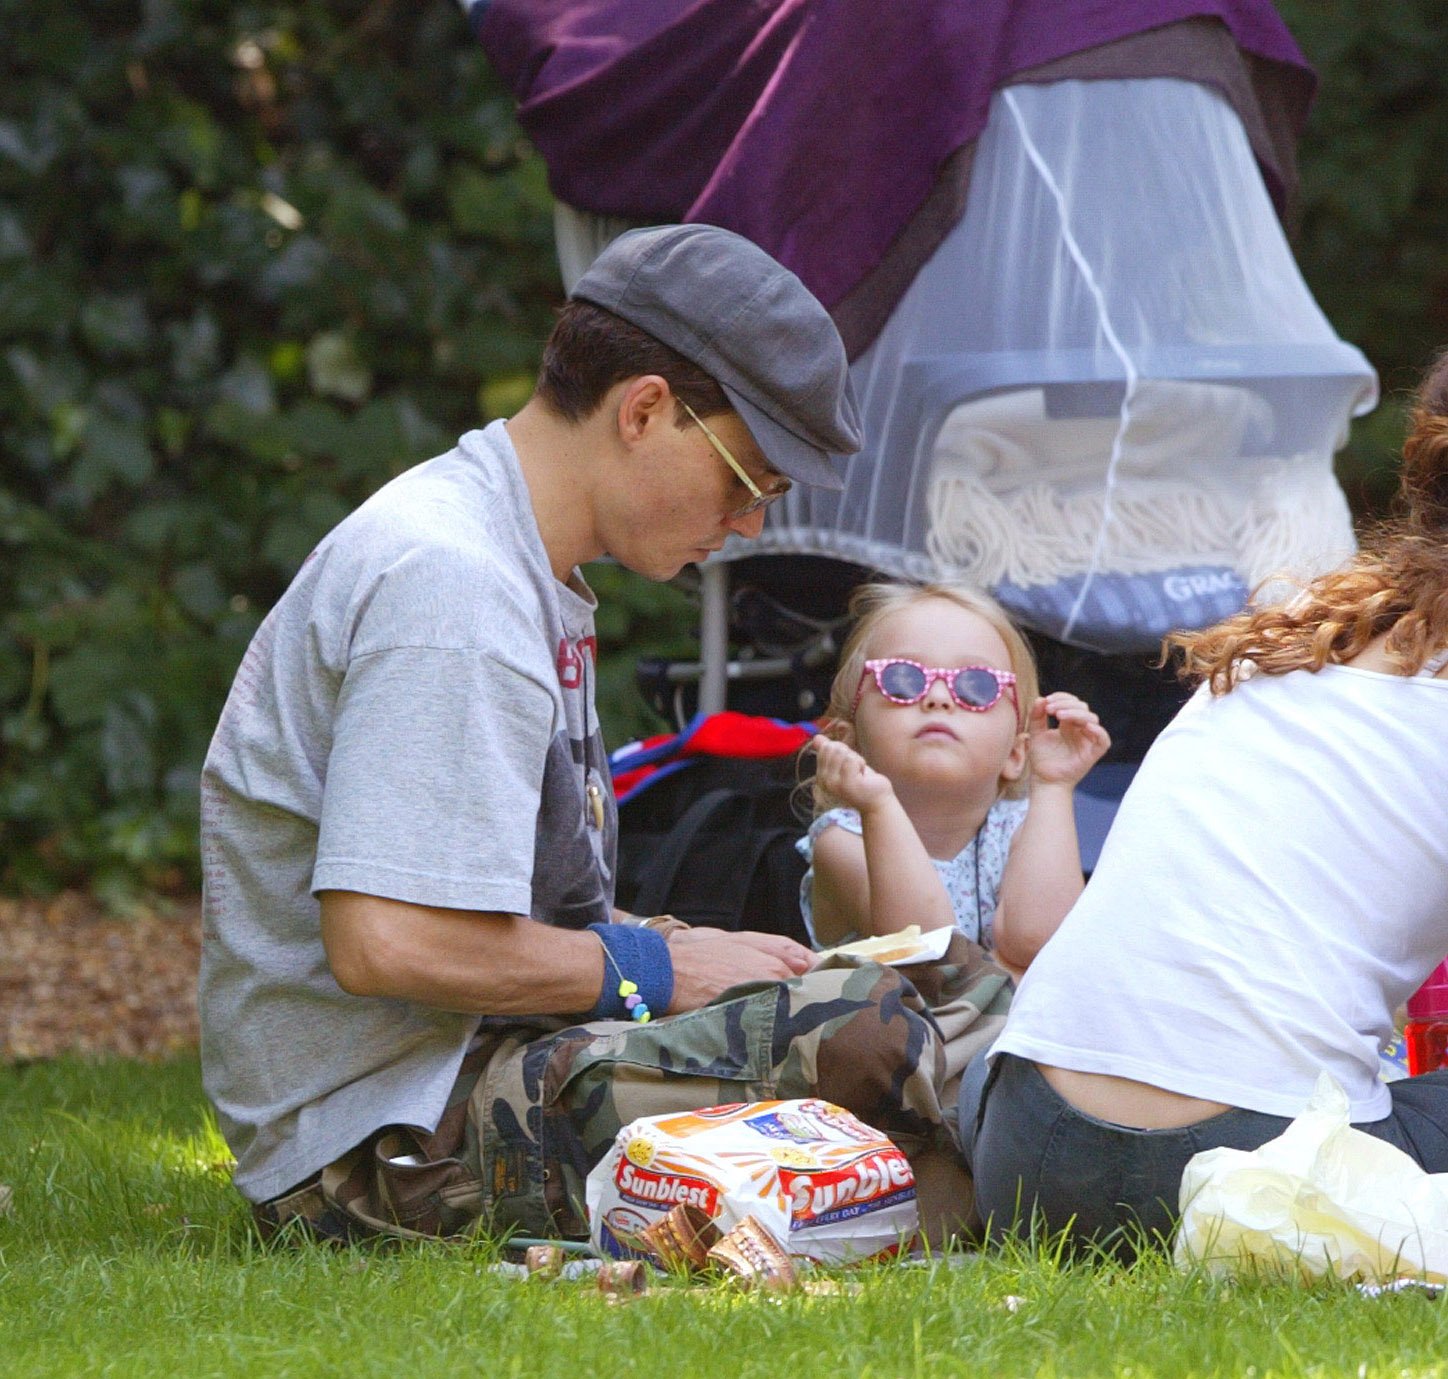 Johnny Depp pictured with his daughter Lily-Rose on a picnic at a London Park. / Source: Getty Images